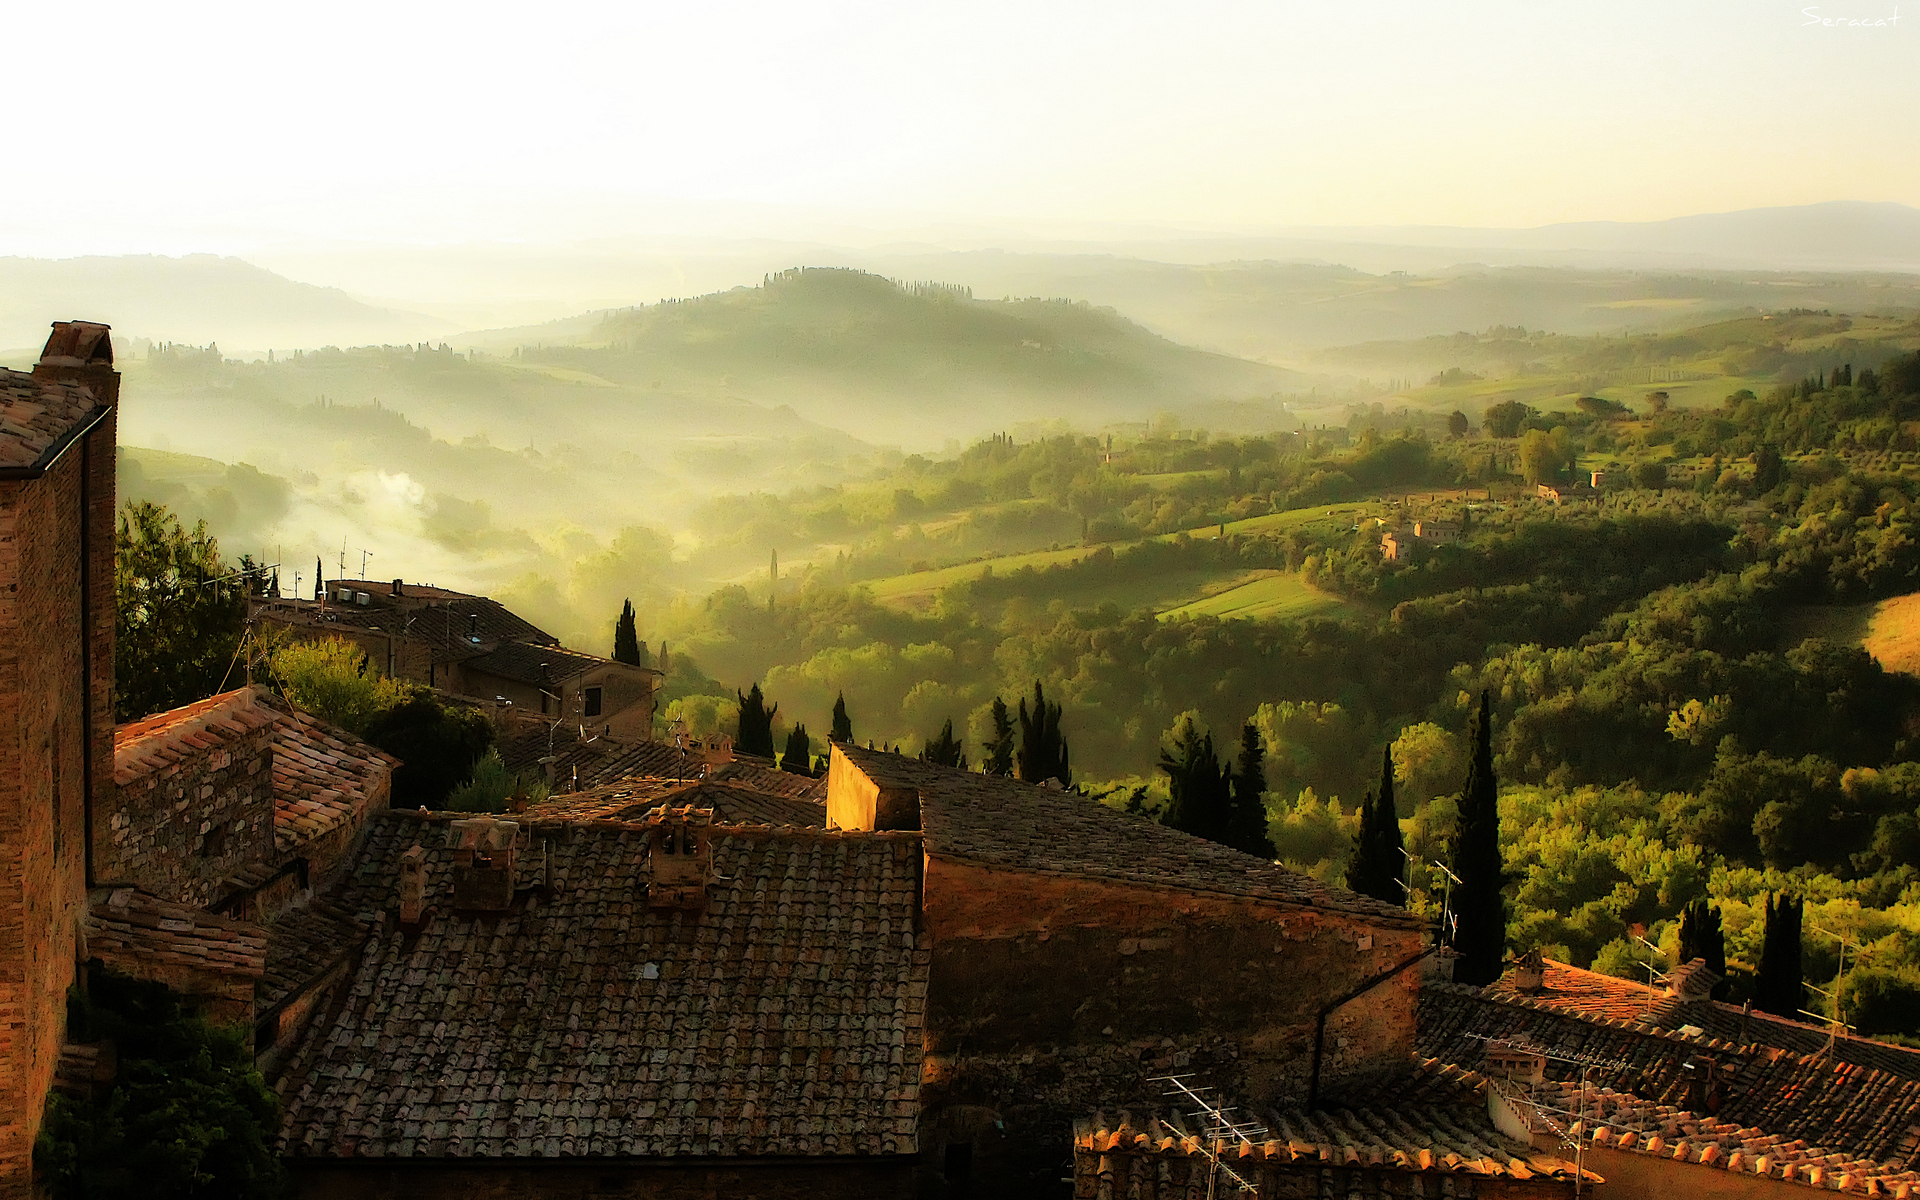 tuscany, photography, earth, green, landscape, roof 32K